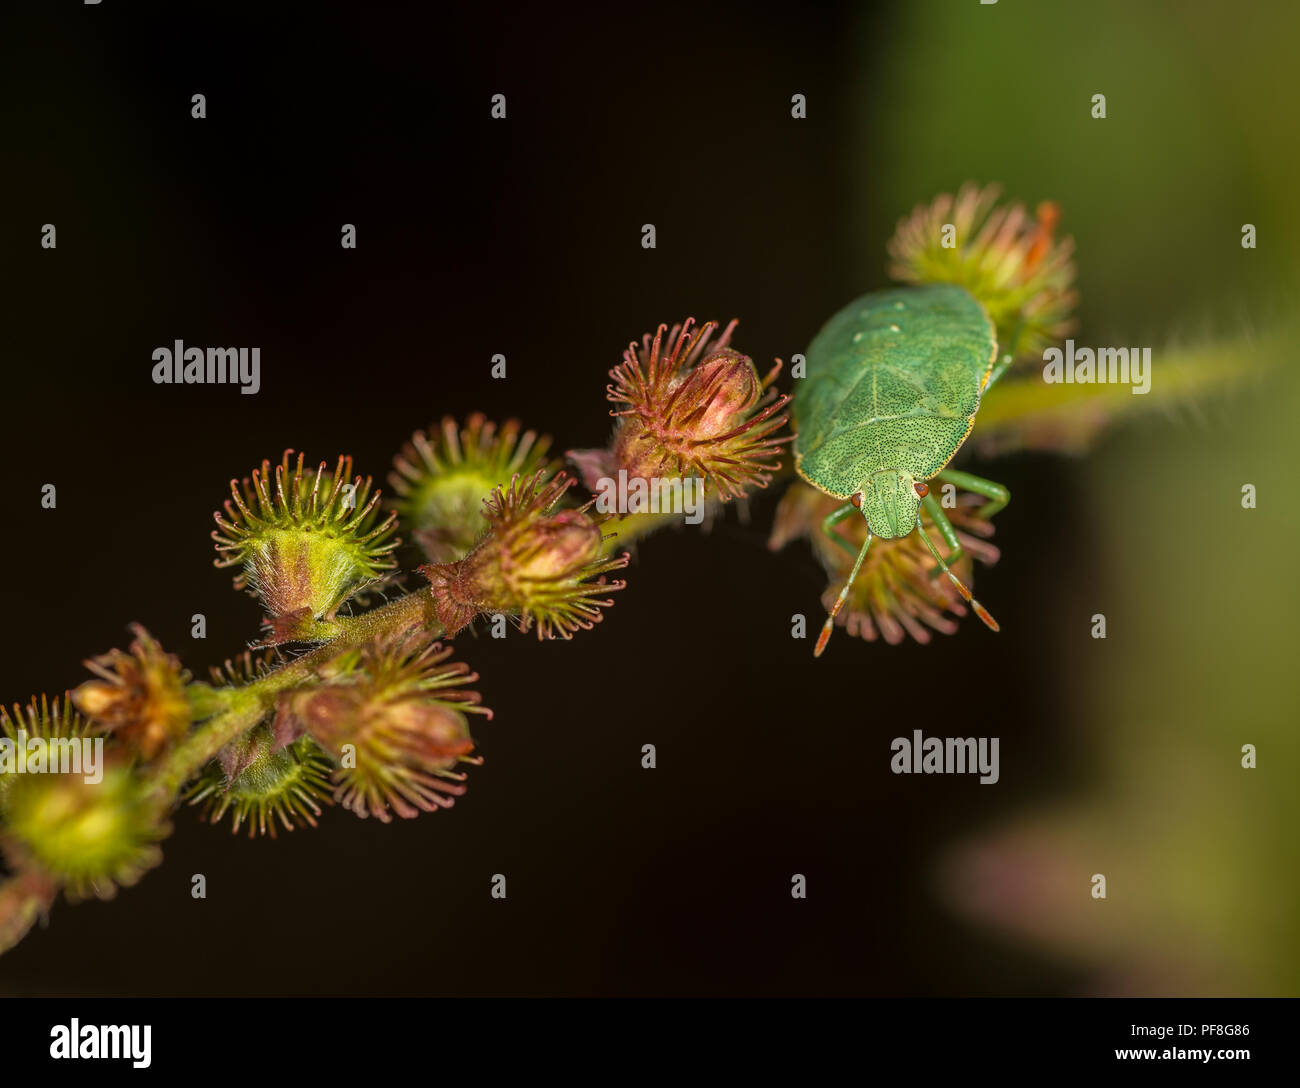 Green shield bug on a branch a plant Stock Photo